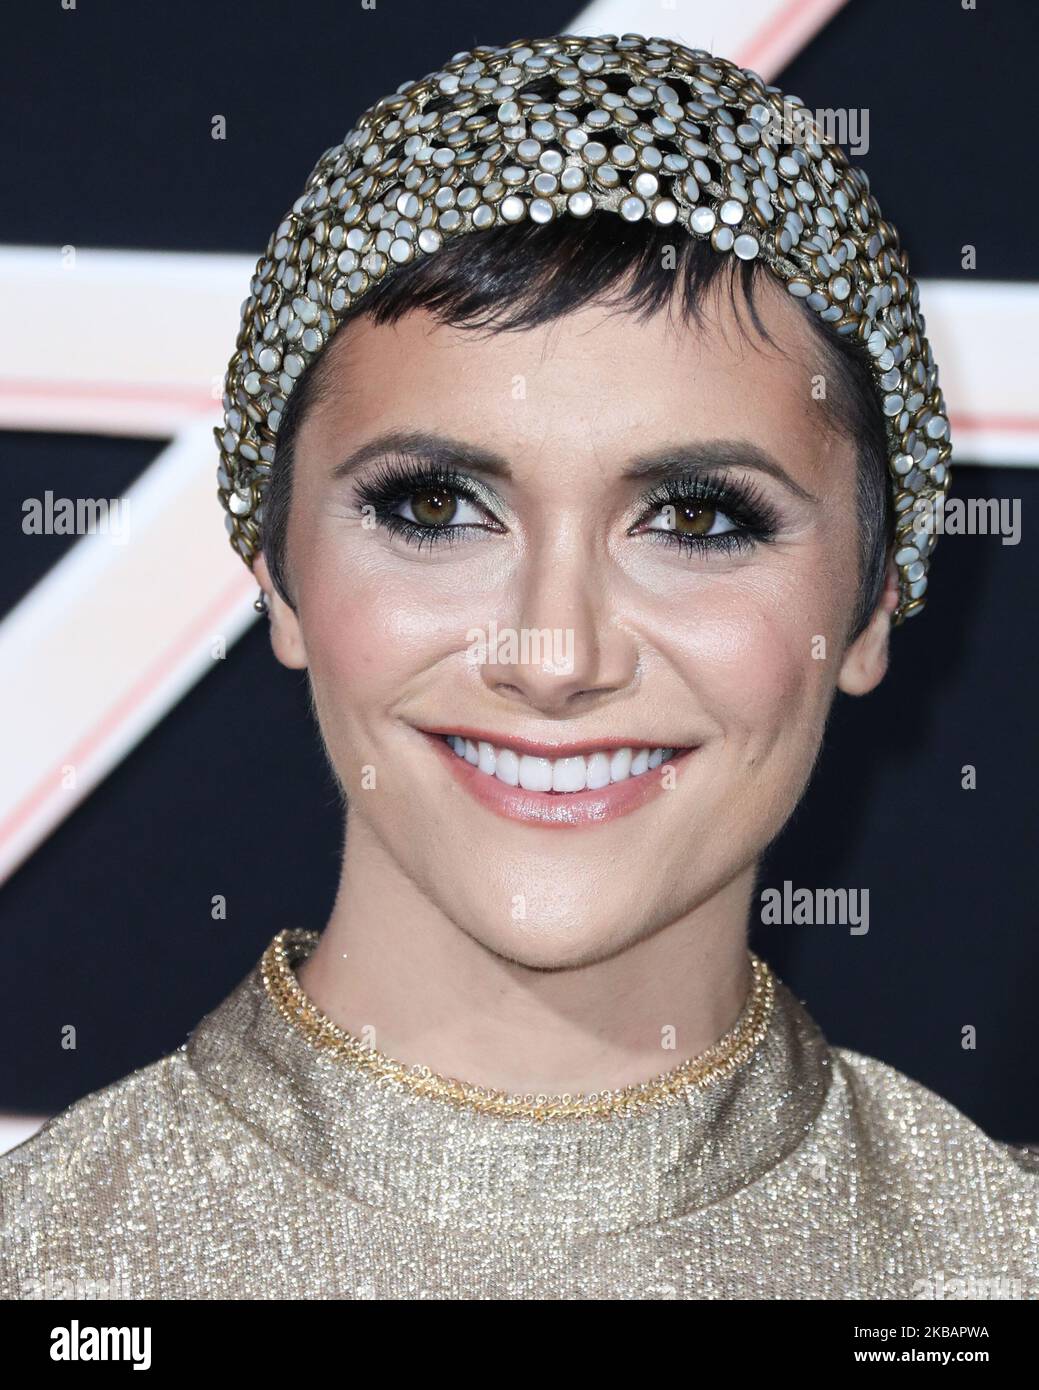 WESTWOOD, LOS ANGELES, CALIFORNIA, USA - NOVEMBER 11: Alyson Stoner arrives at the Los Angeles Premiere Of Columbia Pictures' 'Charlie's Angels' held at the Westwood Regency Theater on November 11, 2019 in Westwood, Los Angeles, California, United States. (Photo by Xavier Collin/Image Press Agency/NurPhoto) Stock Photo